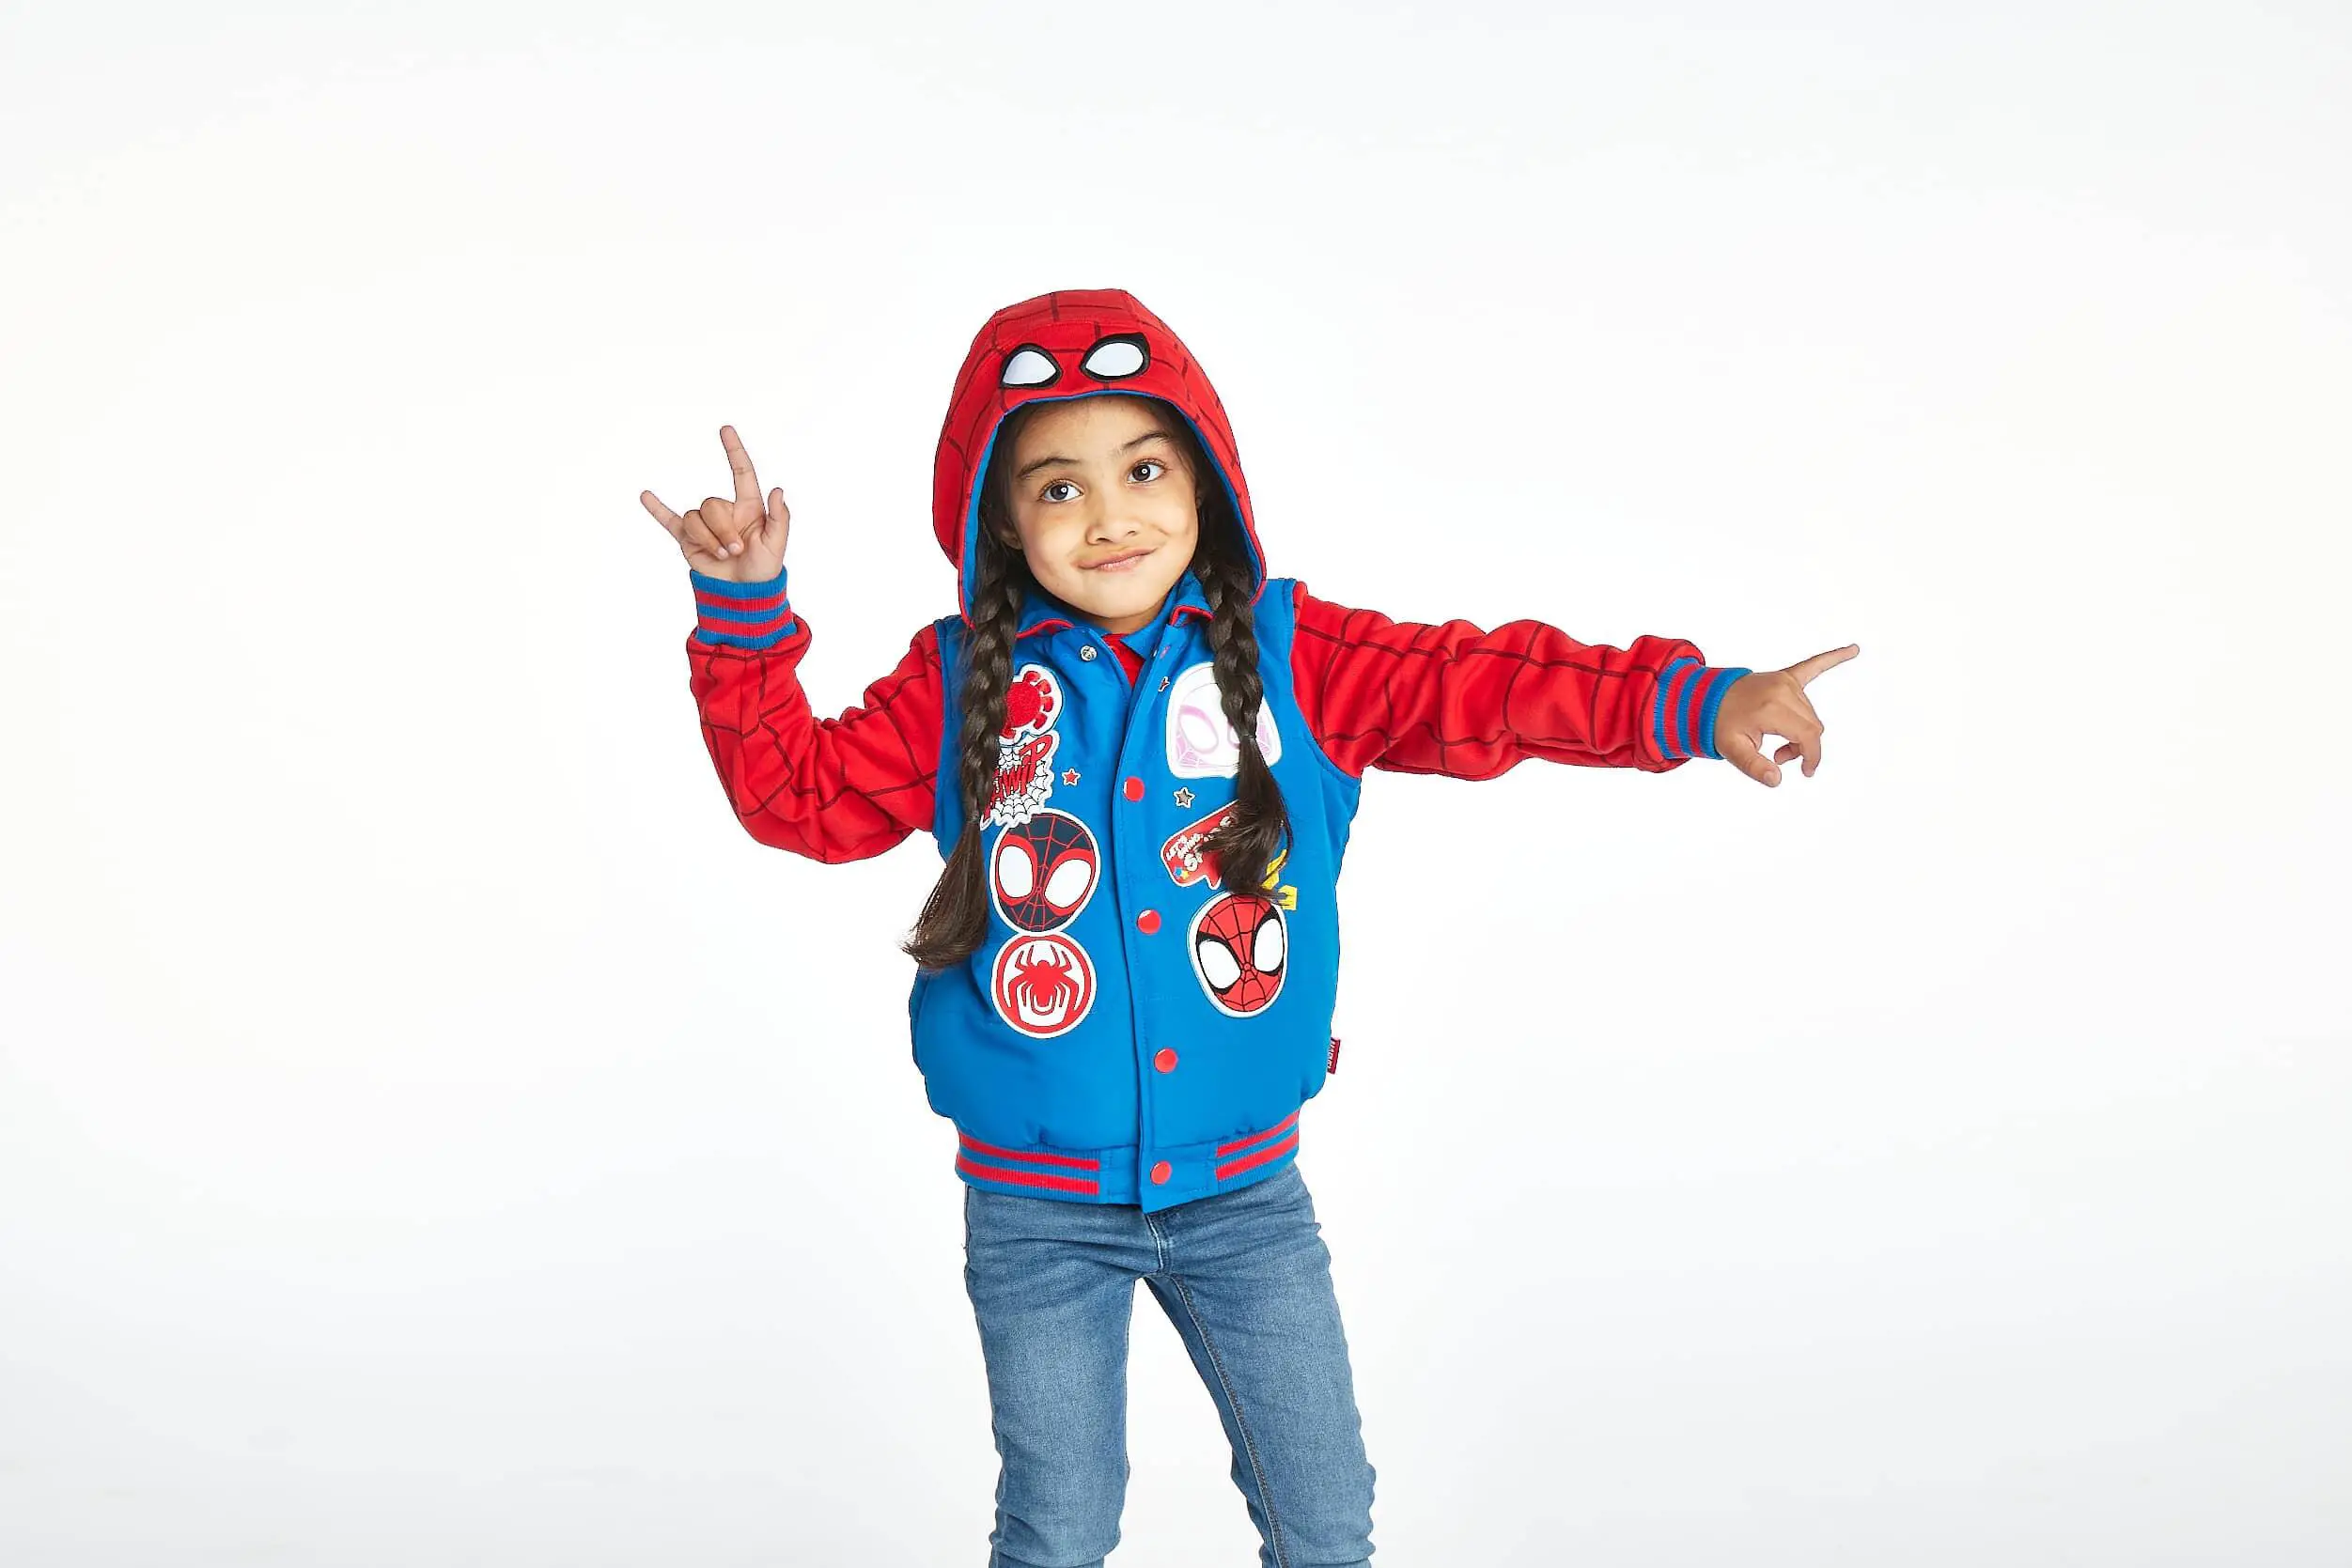 Spidey and His Amazing Friends Hooded Jacket for Kids